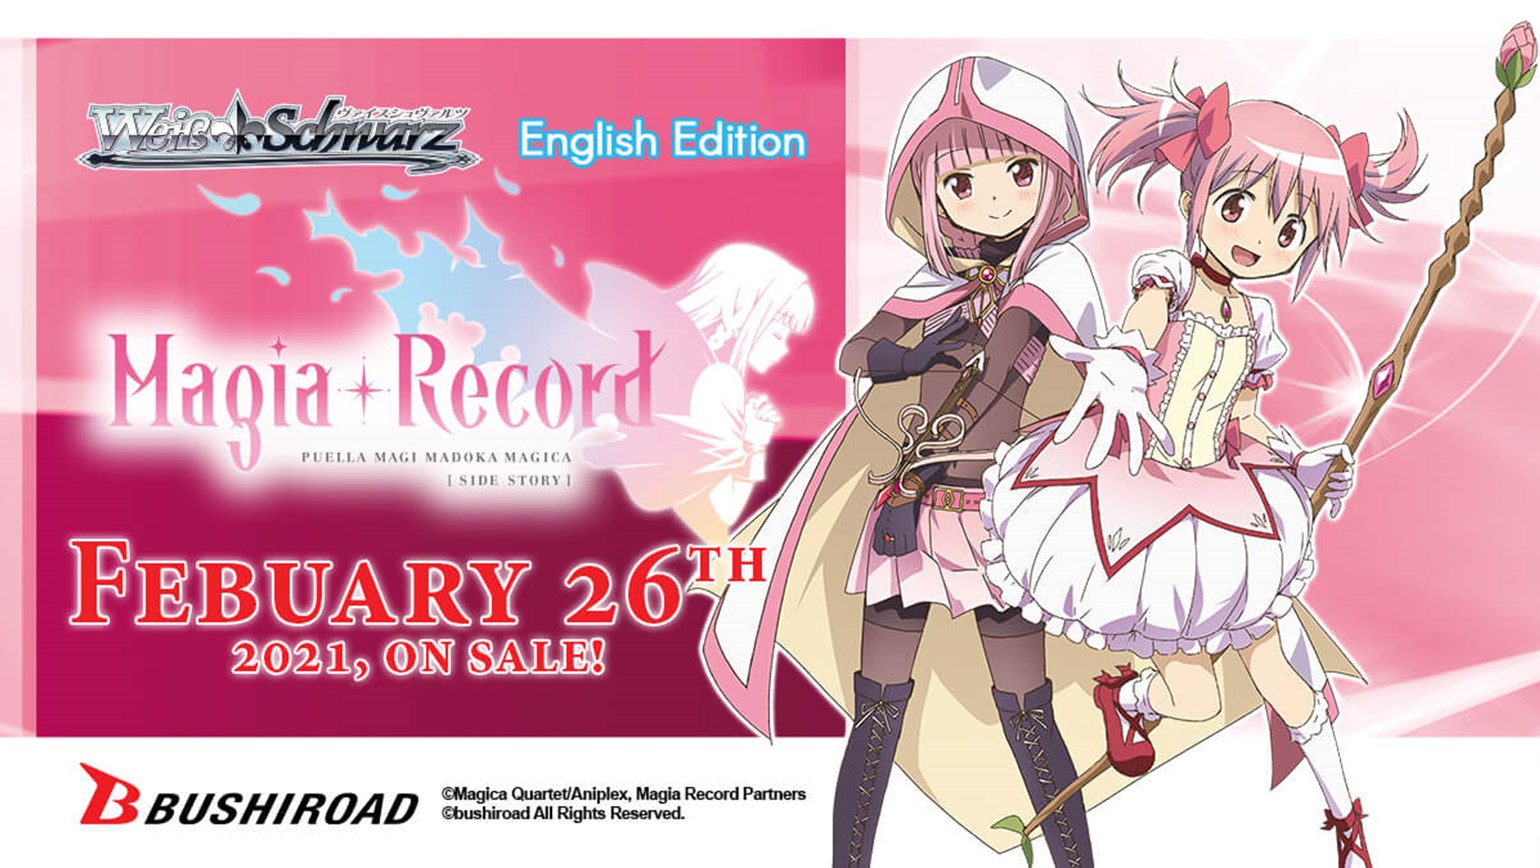 Weiss Schwarz: Magia Record: Puella Magi Madoka Magica Side Story On Sale February 26th!